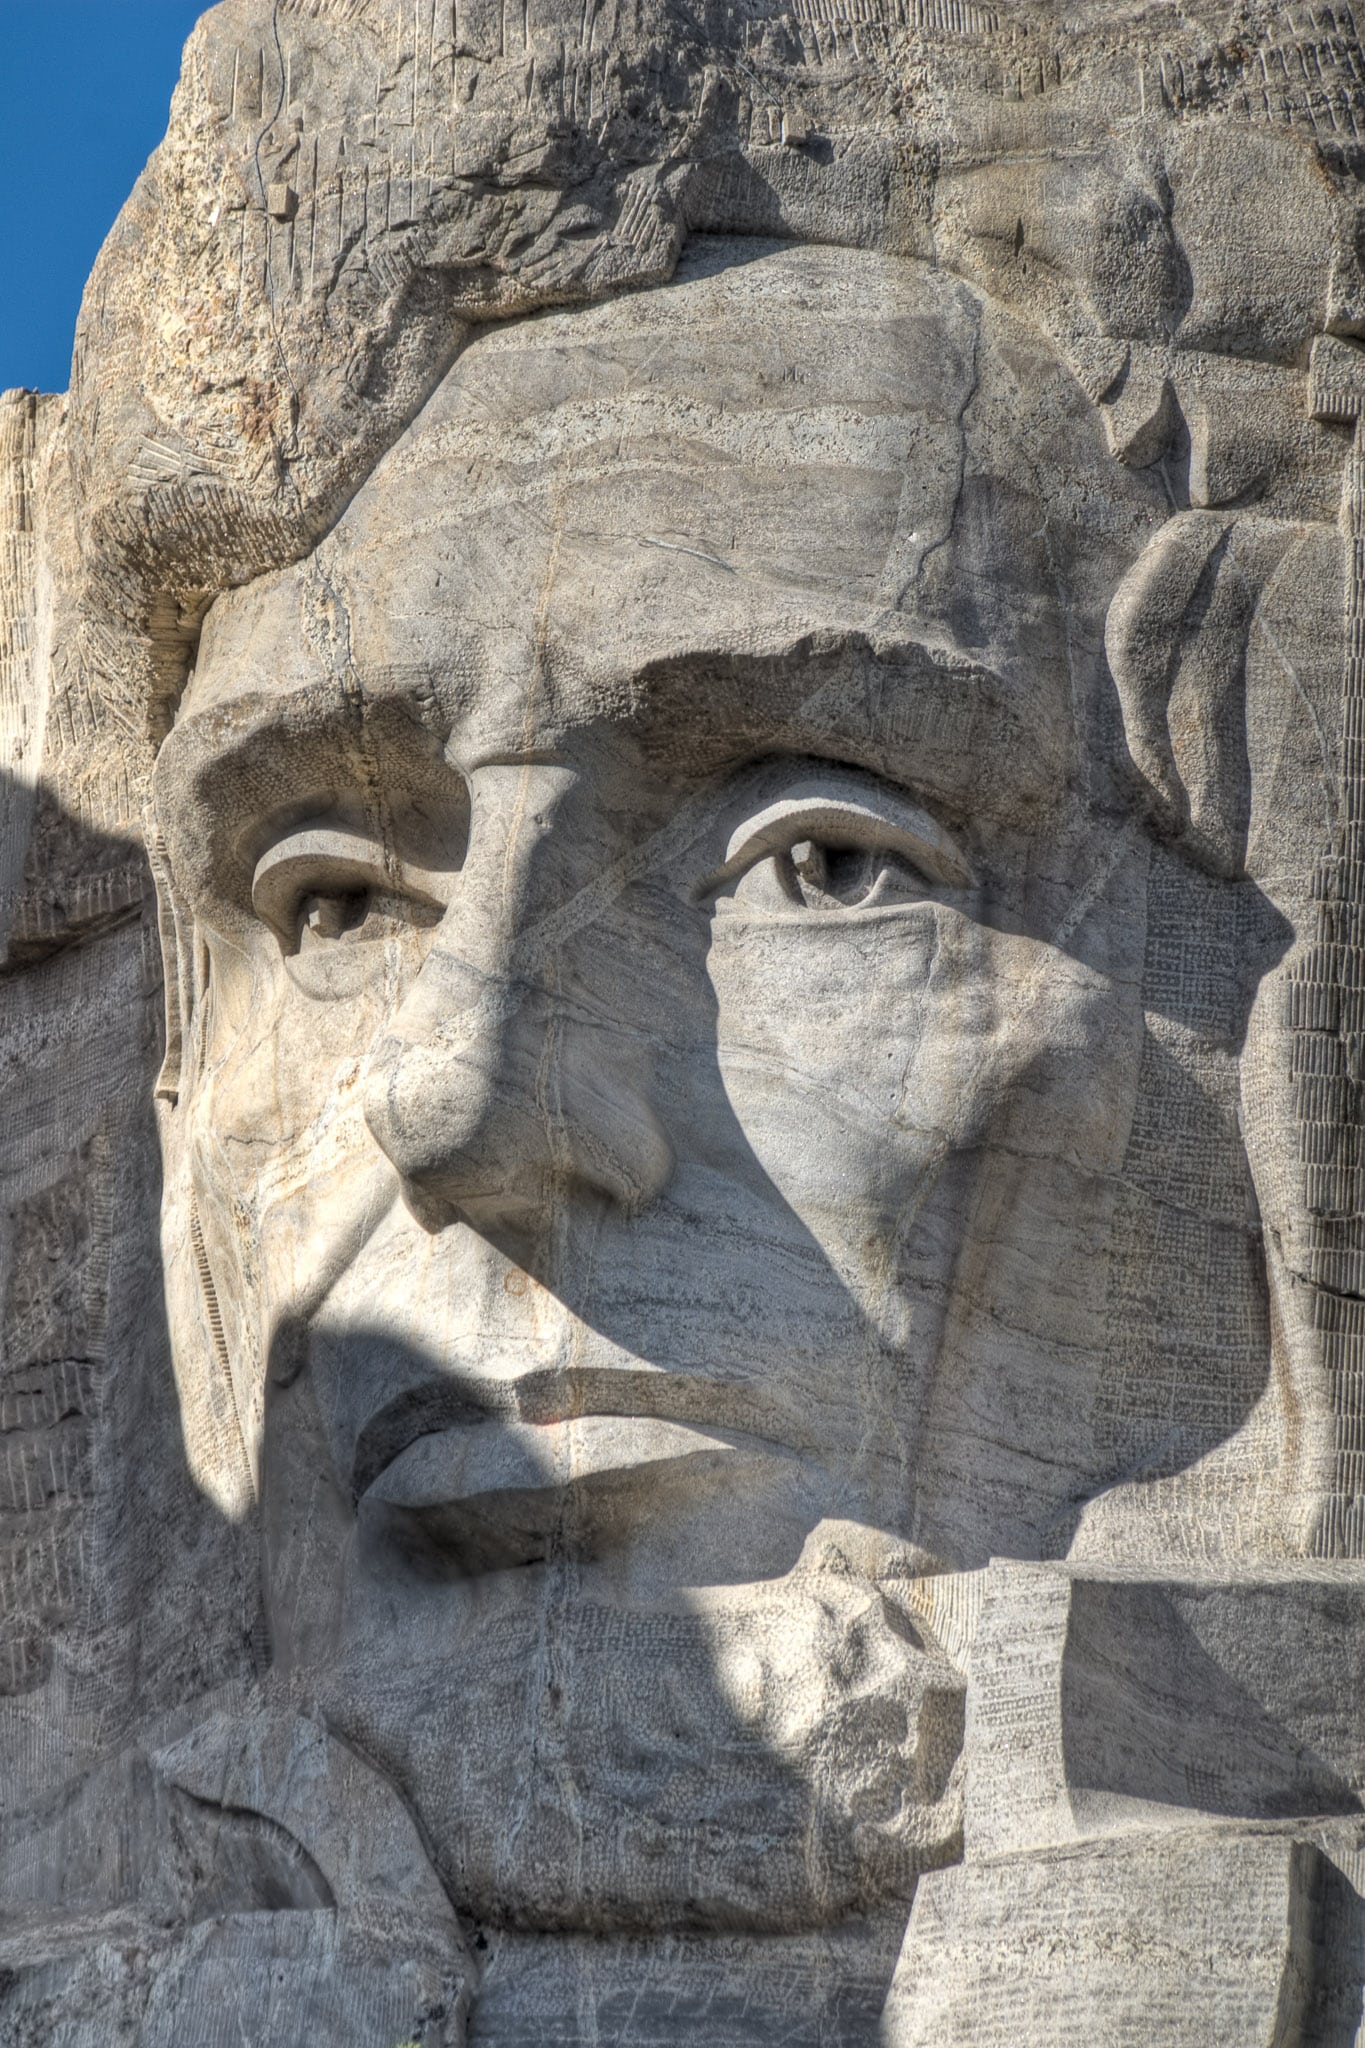 A close-up of the face of President Abraham Lincoln  carved into Mt. Rushmore.